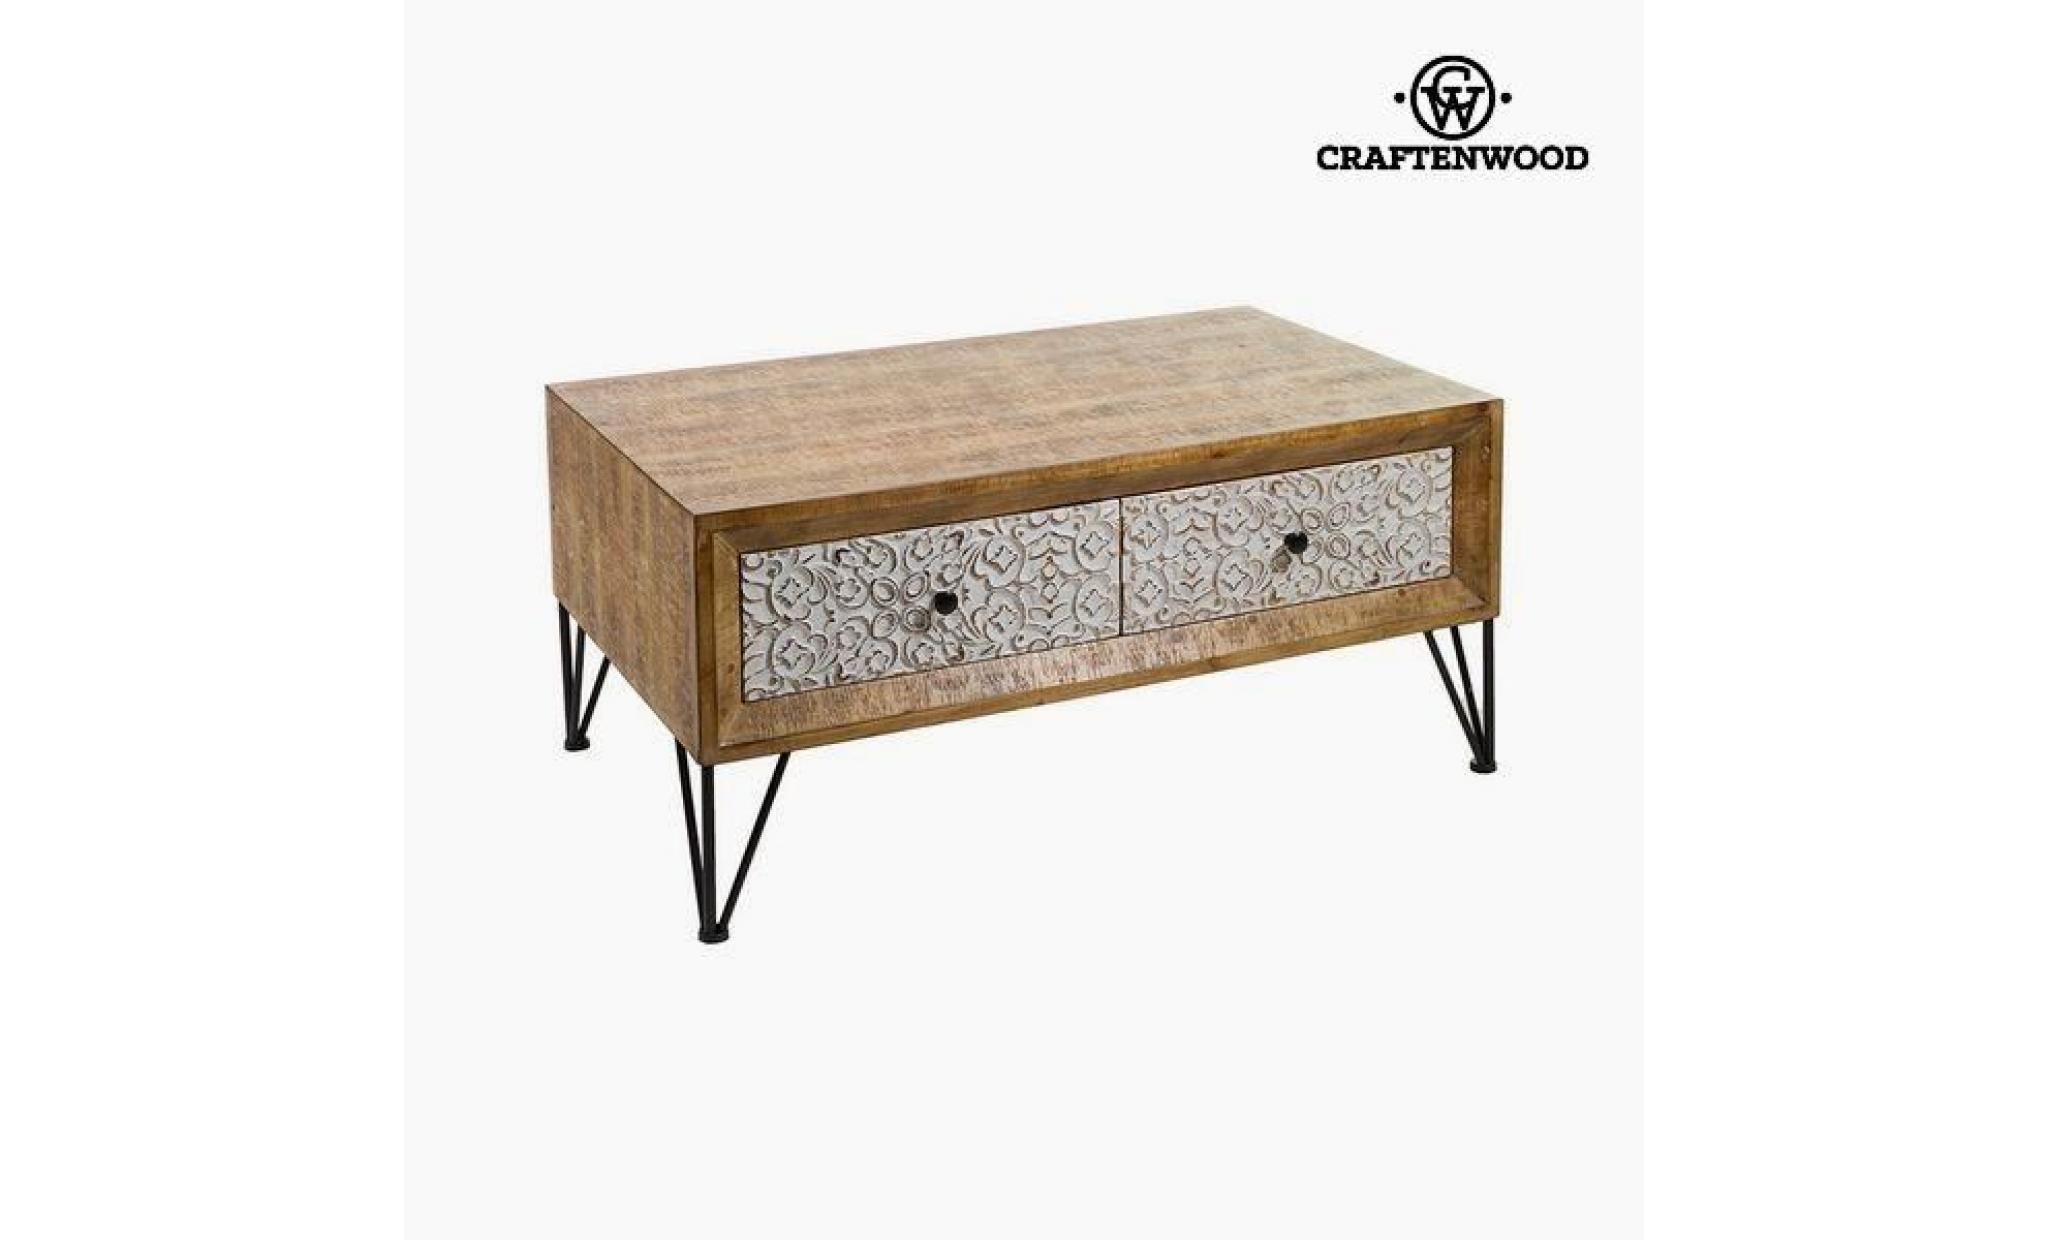 table basse sapin mdf (101 x 60 x 48 cm) by craftenwood